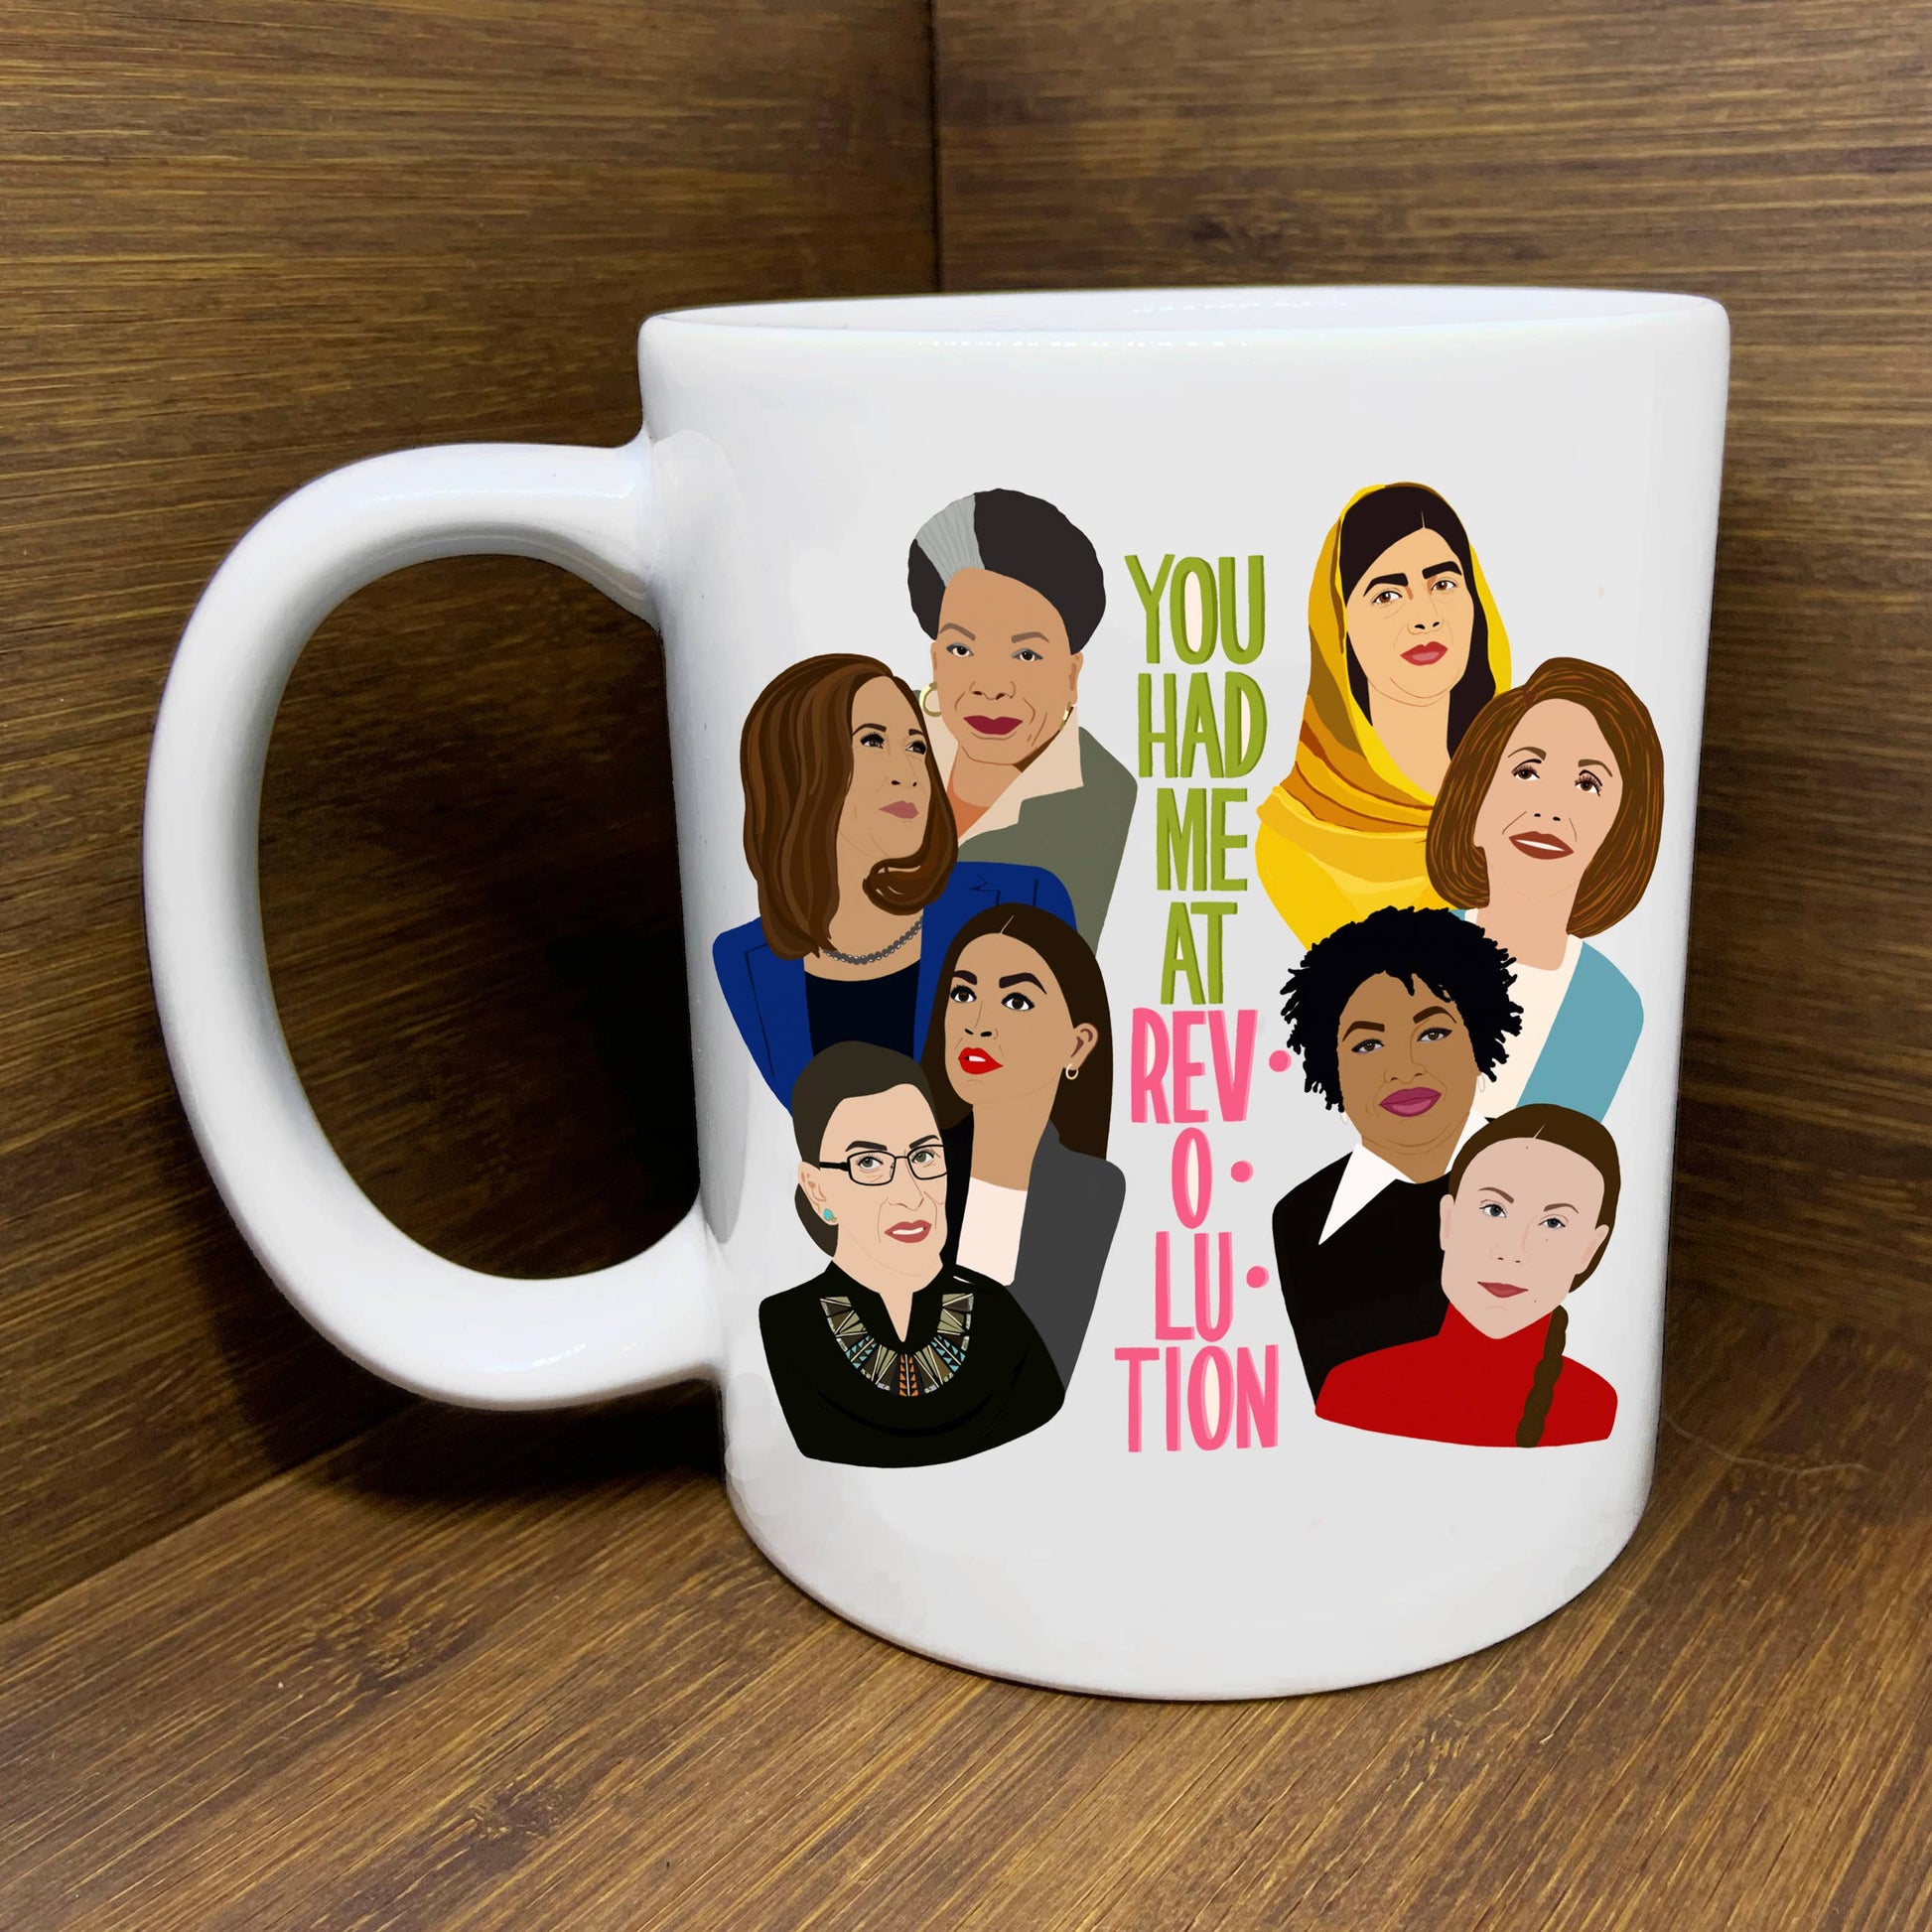 You Had Me Att Revolution Mug with images of 8 inspiring women shown on a wooden surface